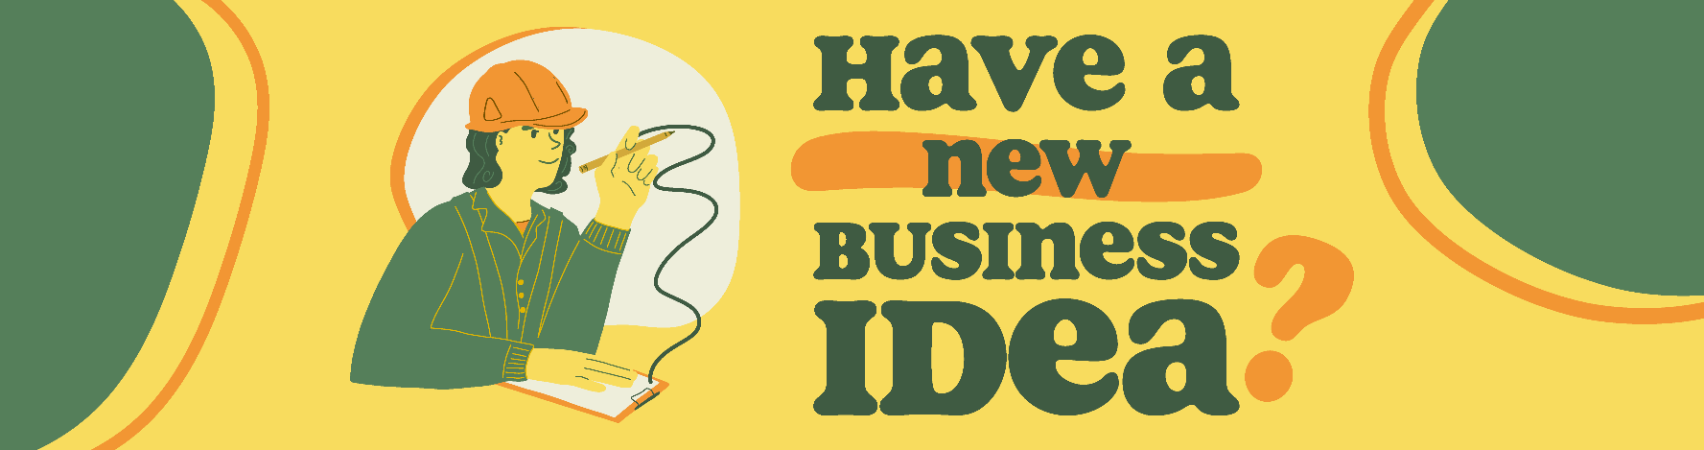 graphic with worker holding a pencil and clipboard that reads "have a new business idea?"